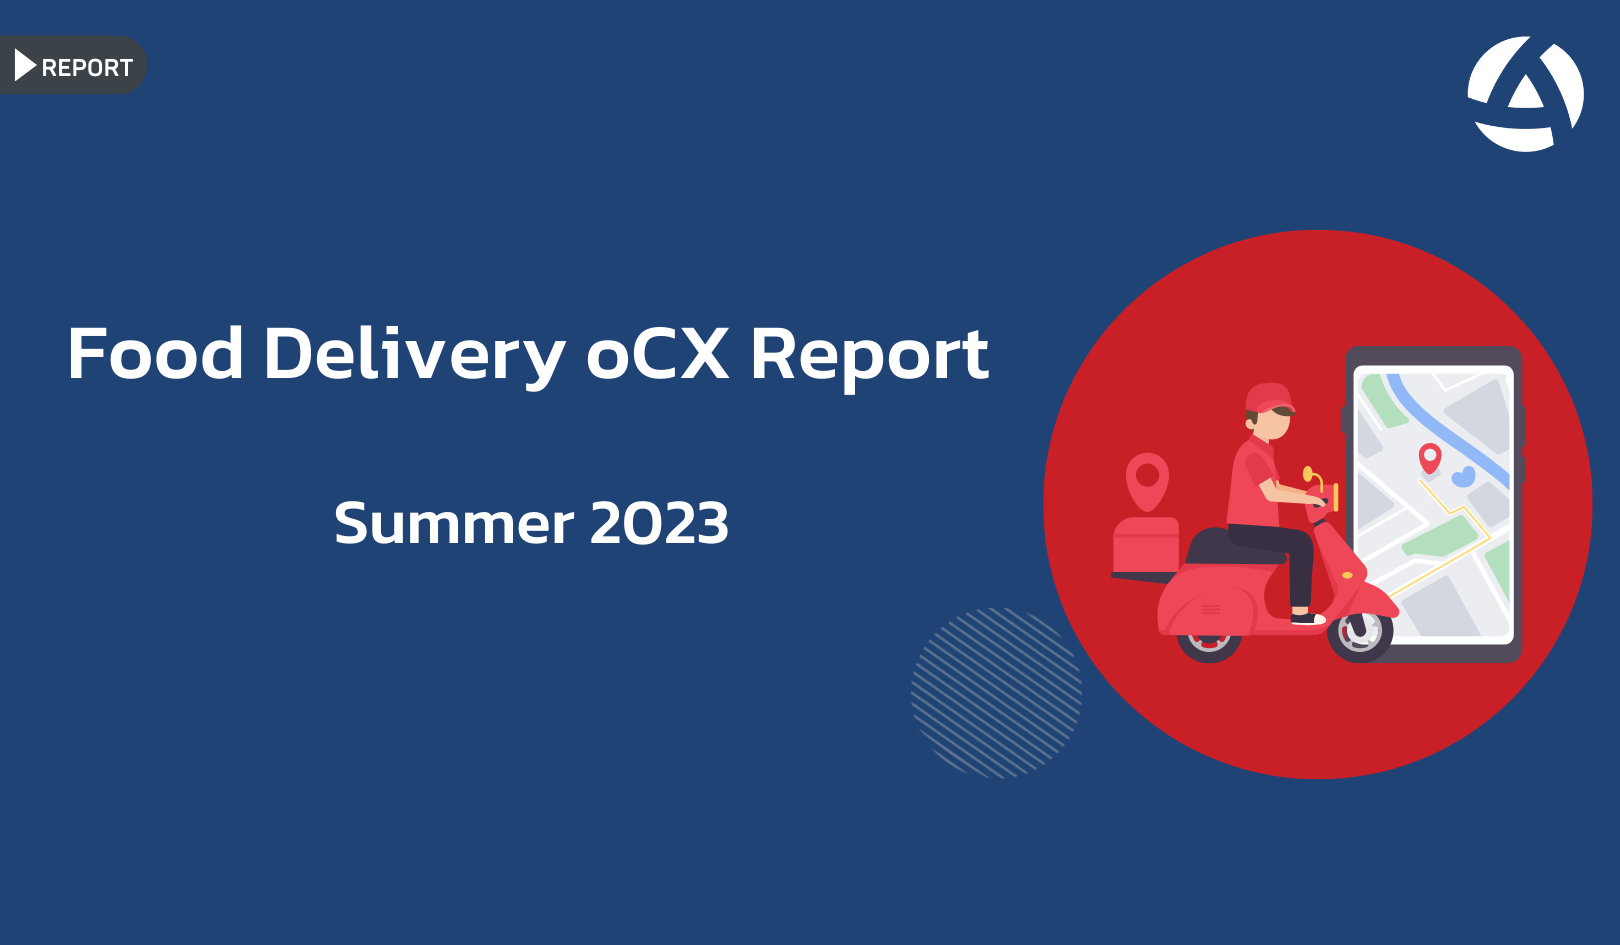 Food Delivery oCX Report Summer 2023